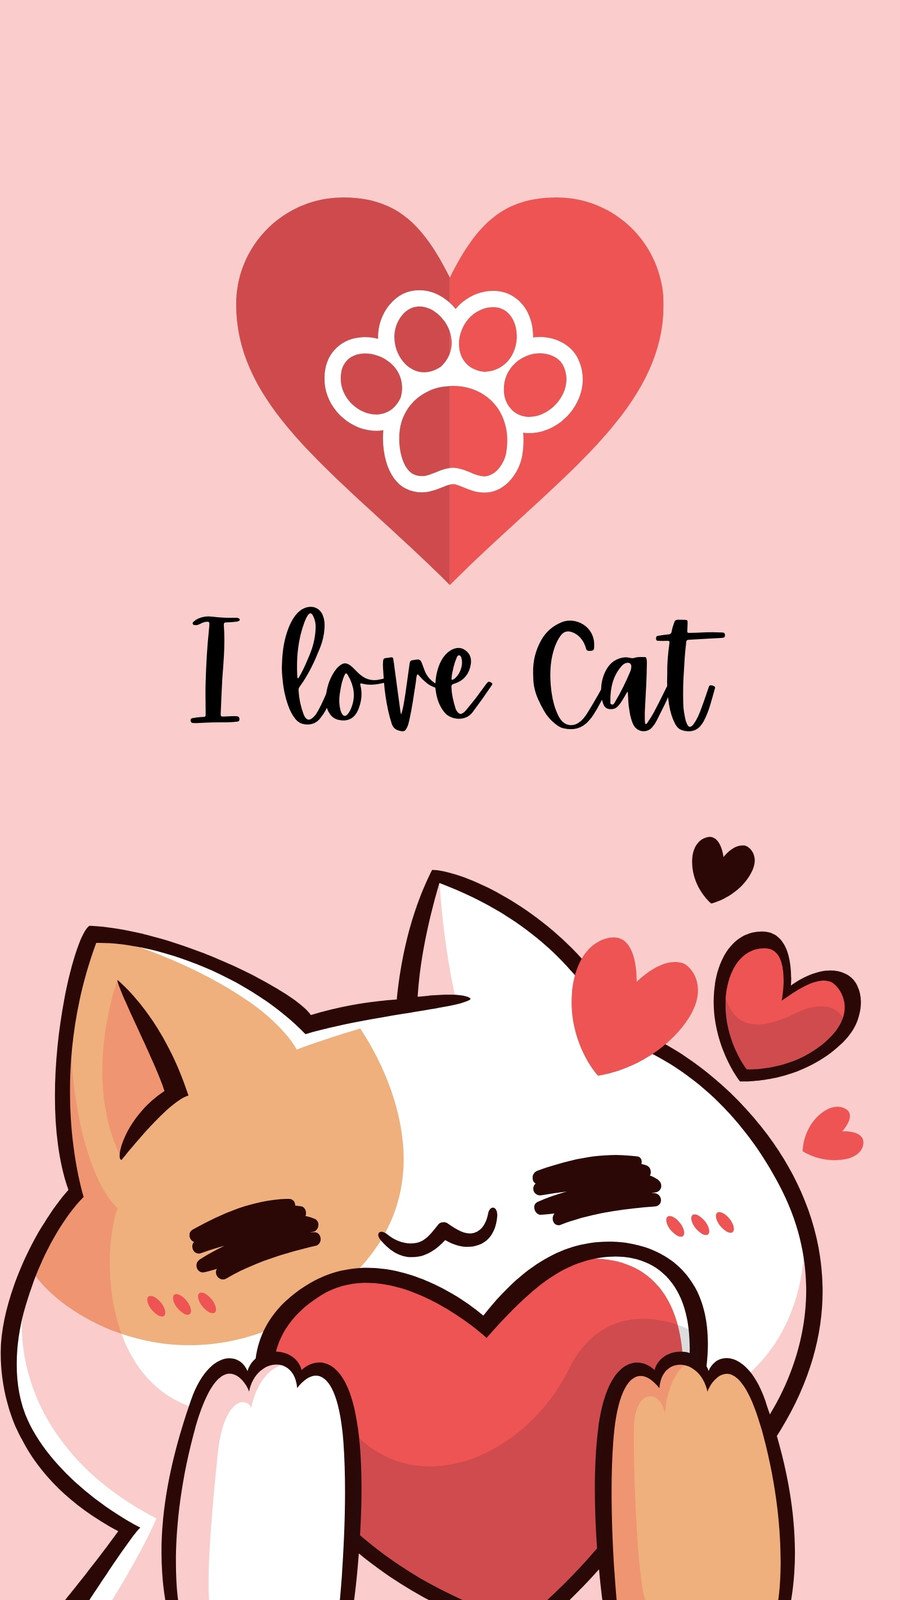 Page 5 - Free customizable cat phone wallpaper templates | Canva